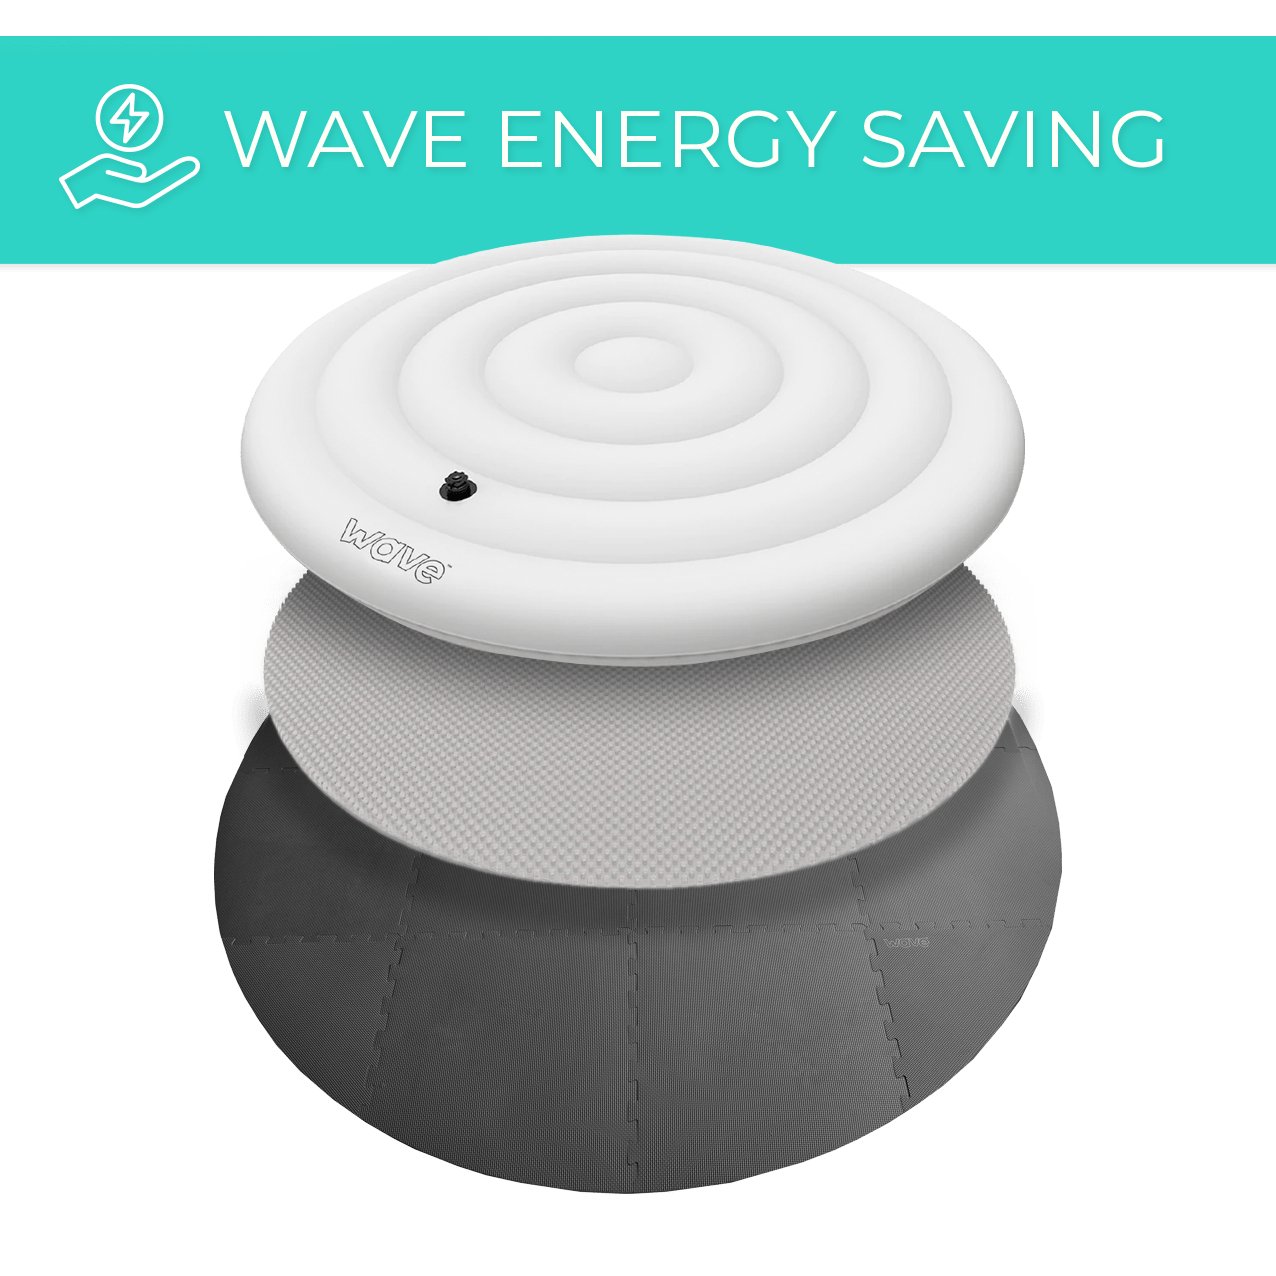 Energy Saving Bundle for Round 4 Person Spa - Wave Spas Inflatable, foam Hot Tubs